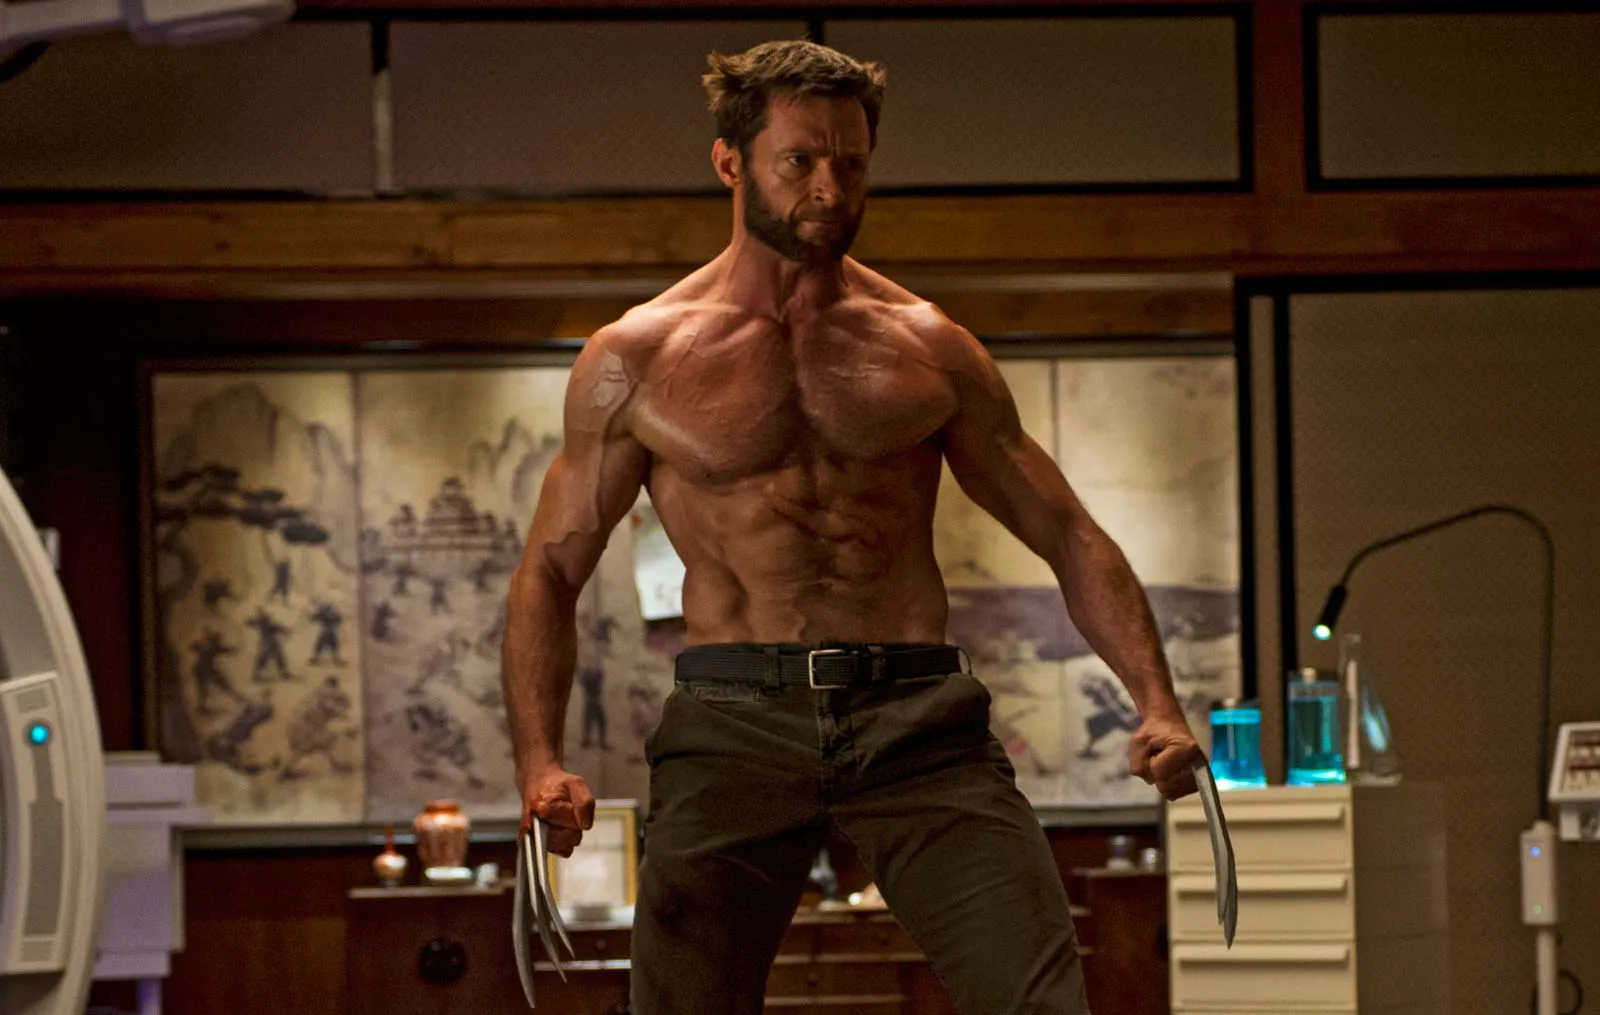 Who directed the film 'Logan,' which marked Hugh Jackman's final portrayal of Wolverine?